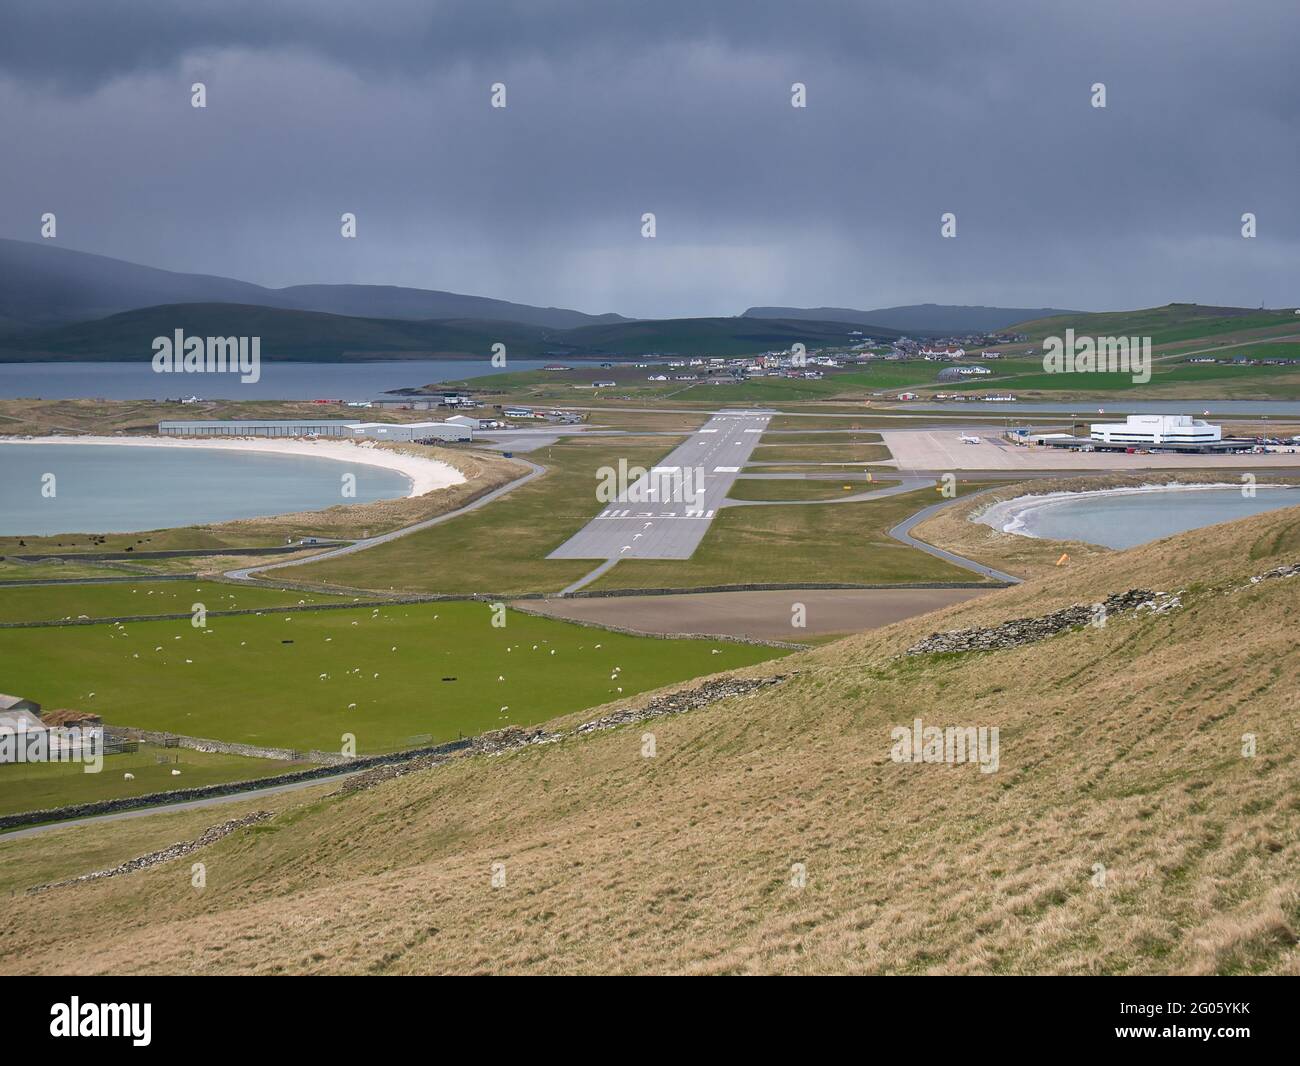 On a cloudy, overcast day, a view of Sumburgh Airport runway 15-33 between two beaches in the south of Shetland in the UK. Stock Photo